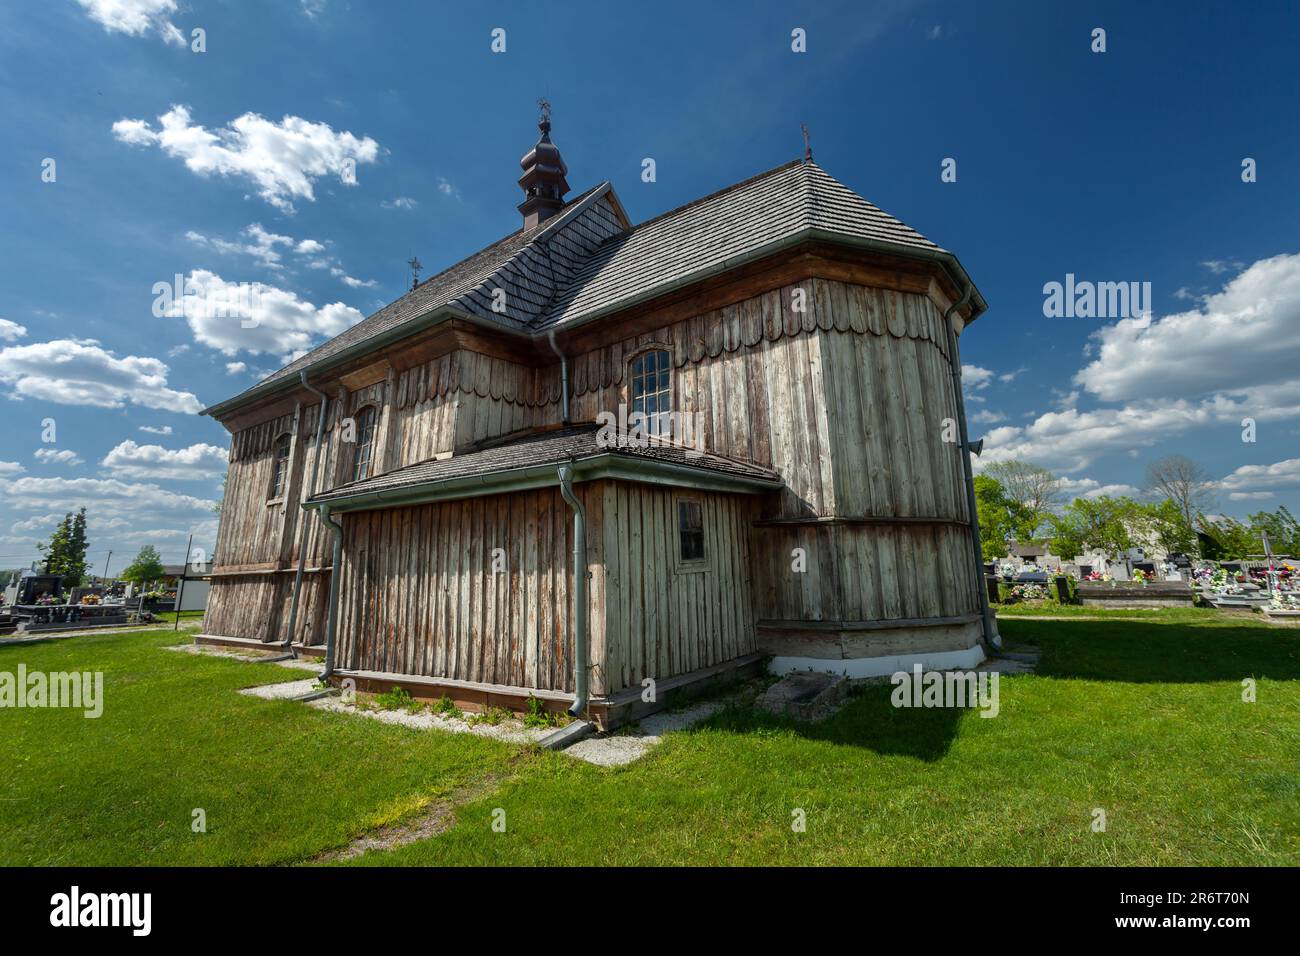 Przysiolek, Lubelskie, Poland - May 14, 2023: Historic wooden Roman Catholic Church from 1746, rear view Stock Photo